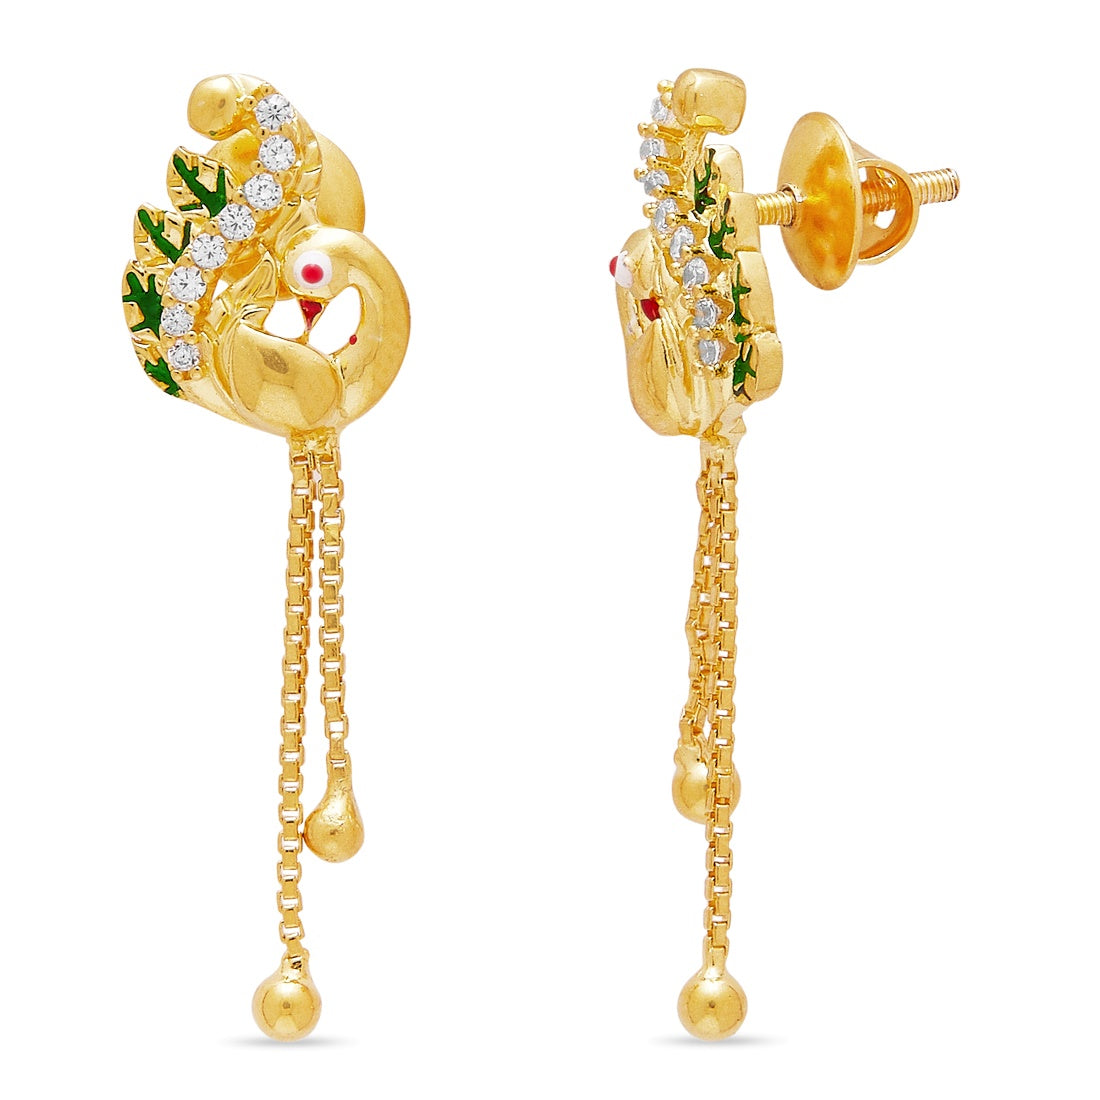 Regal Plumage 925 Sterling Silver Gold-Plated Peacock Earrings